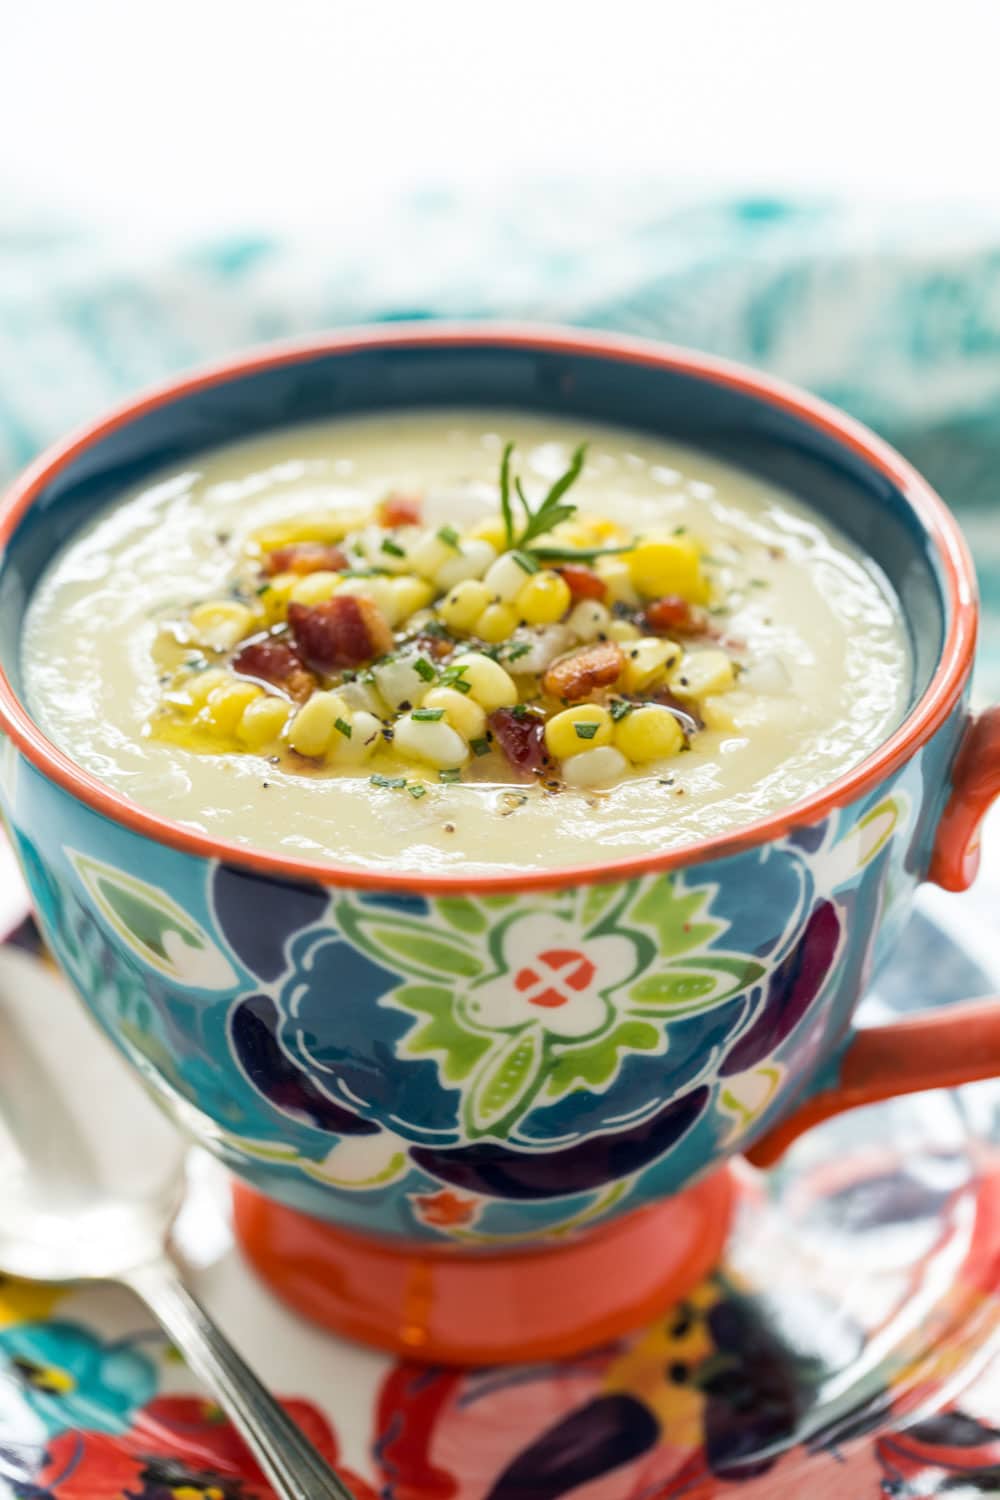 Vertical photo of Fresh Corn Soup in a floral patterned mug and plate.